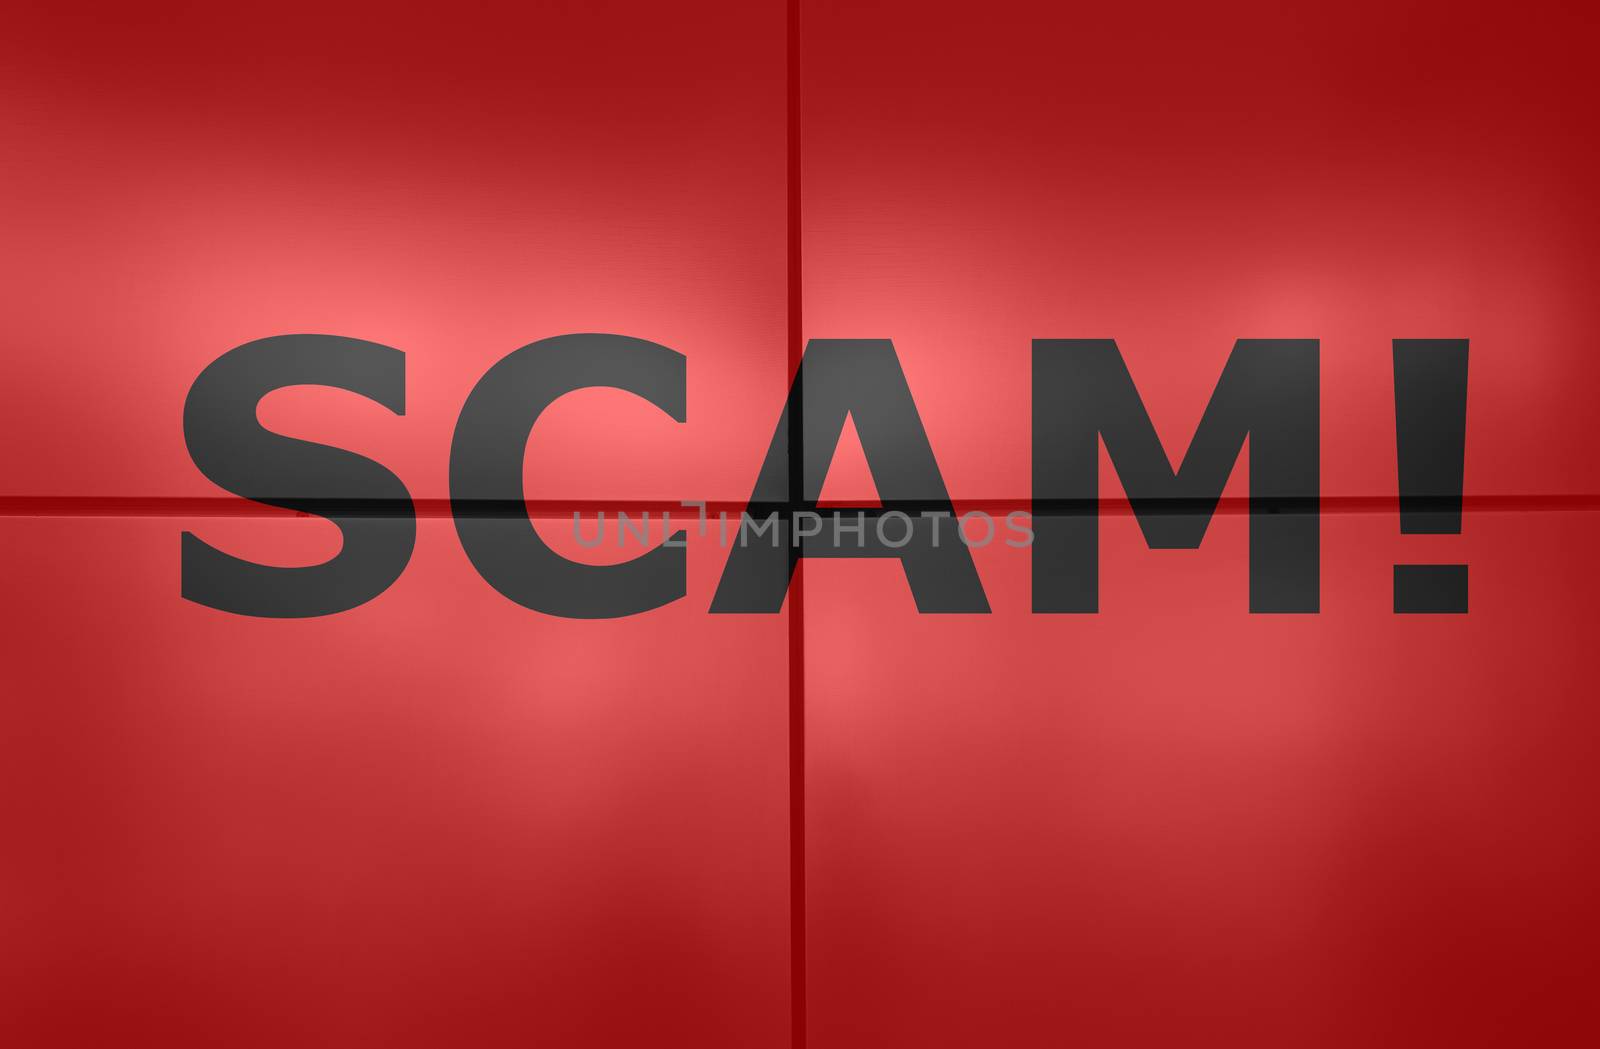 Scam text on red background. by szefei